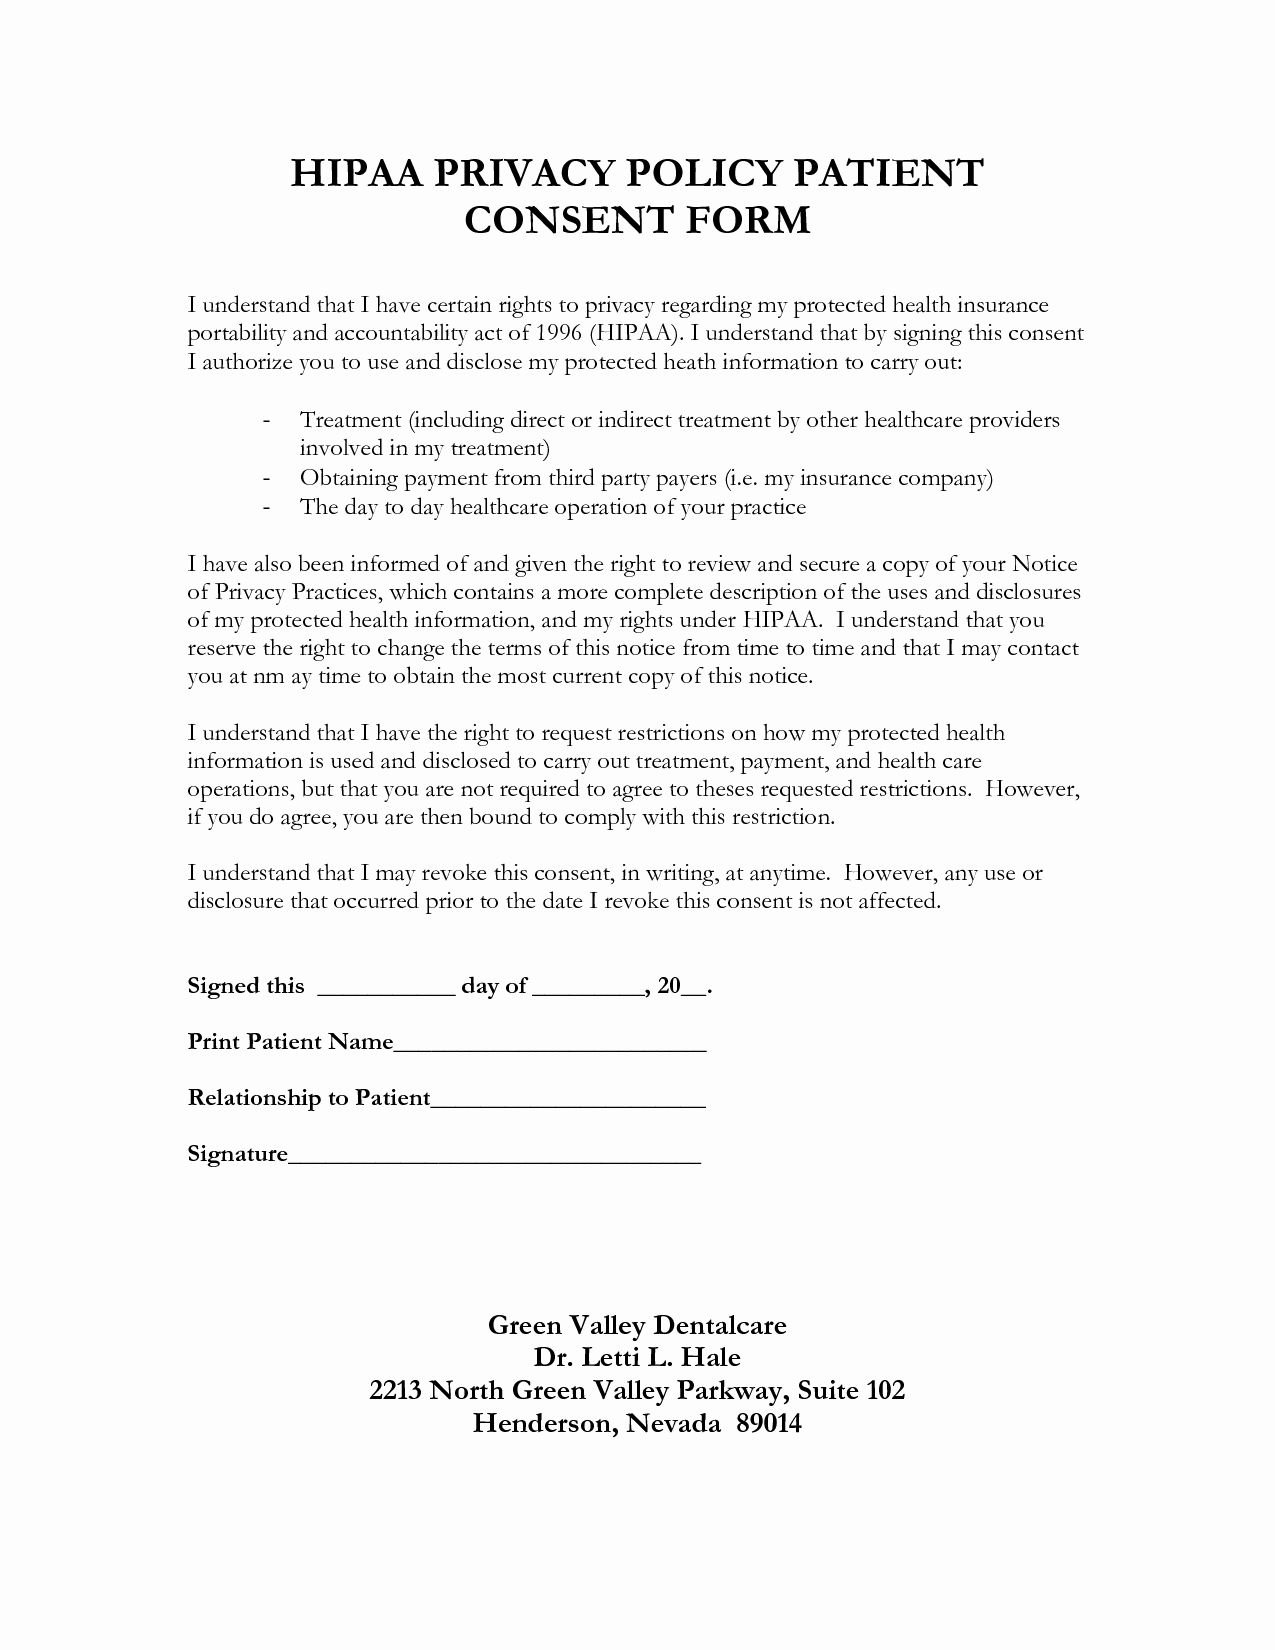 post hipaa patient consent forms